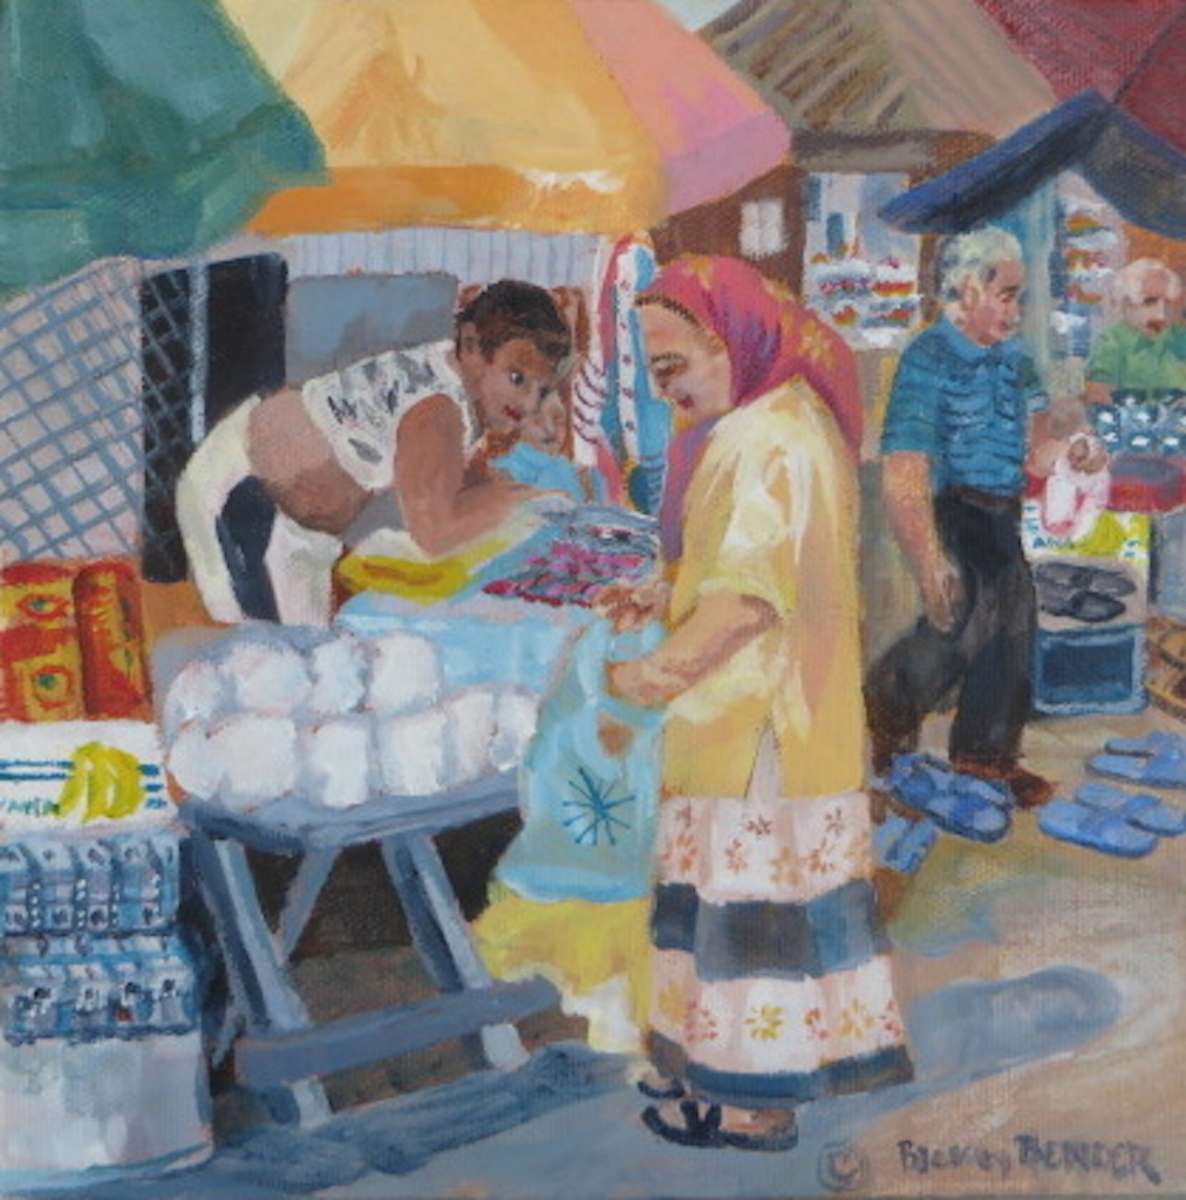 At The Street Market